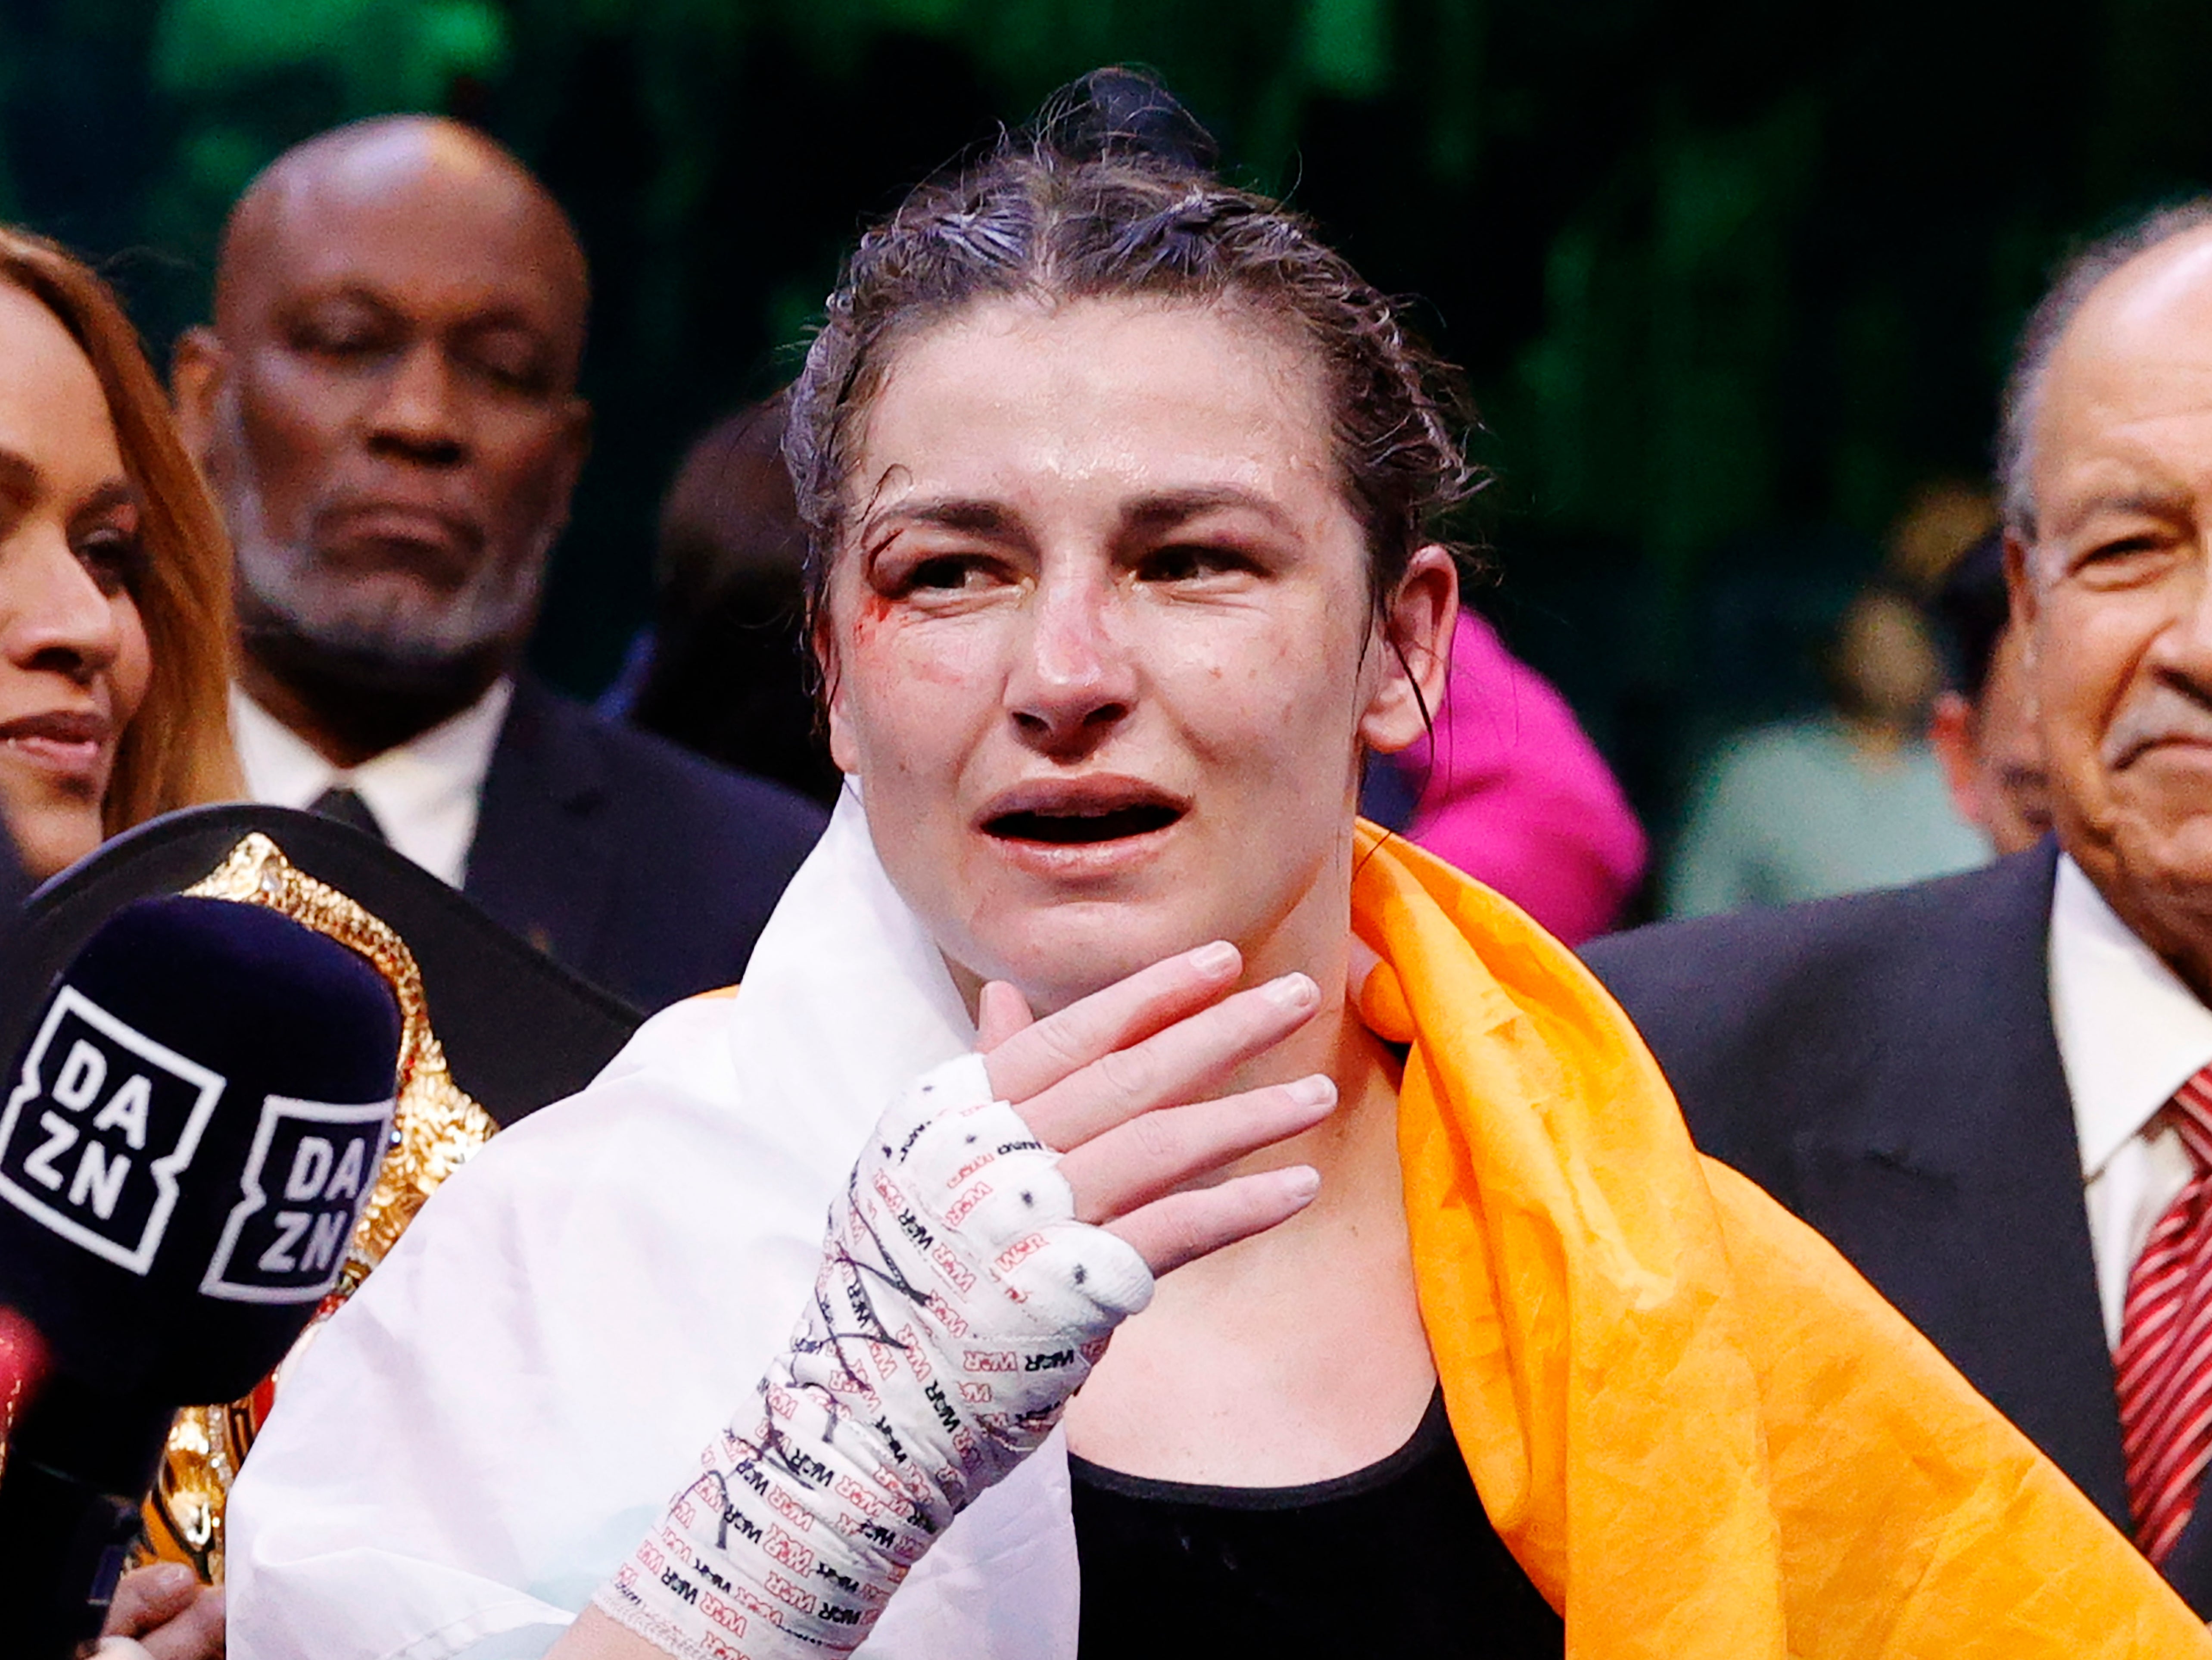 Katie Taylor returns to the ring on Saturday at Wembley Arena